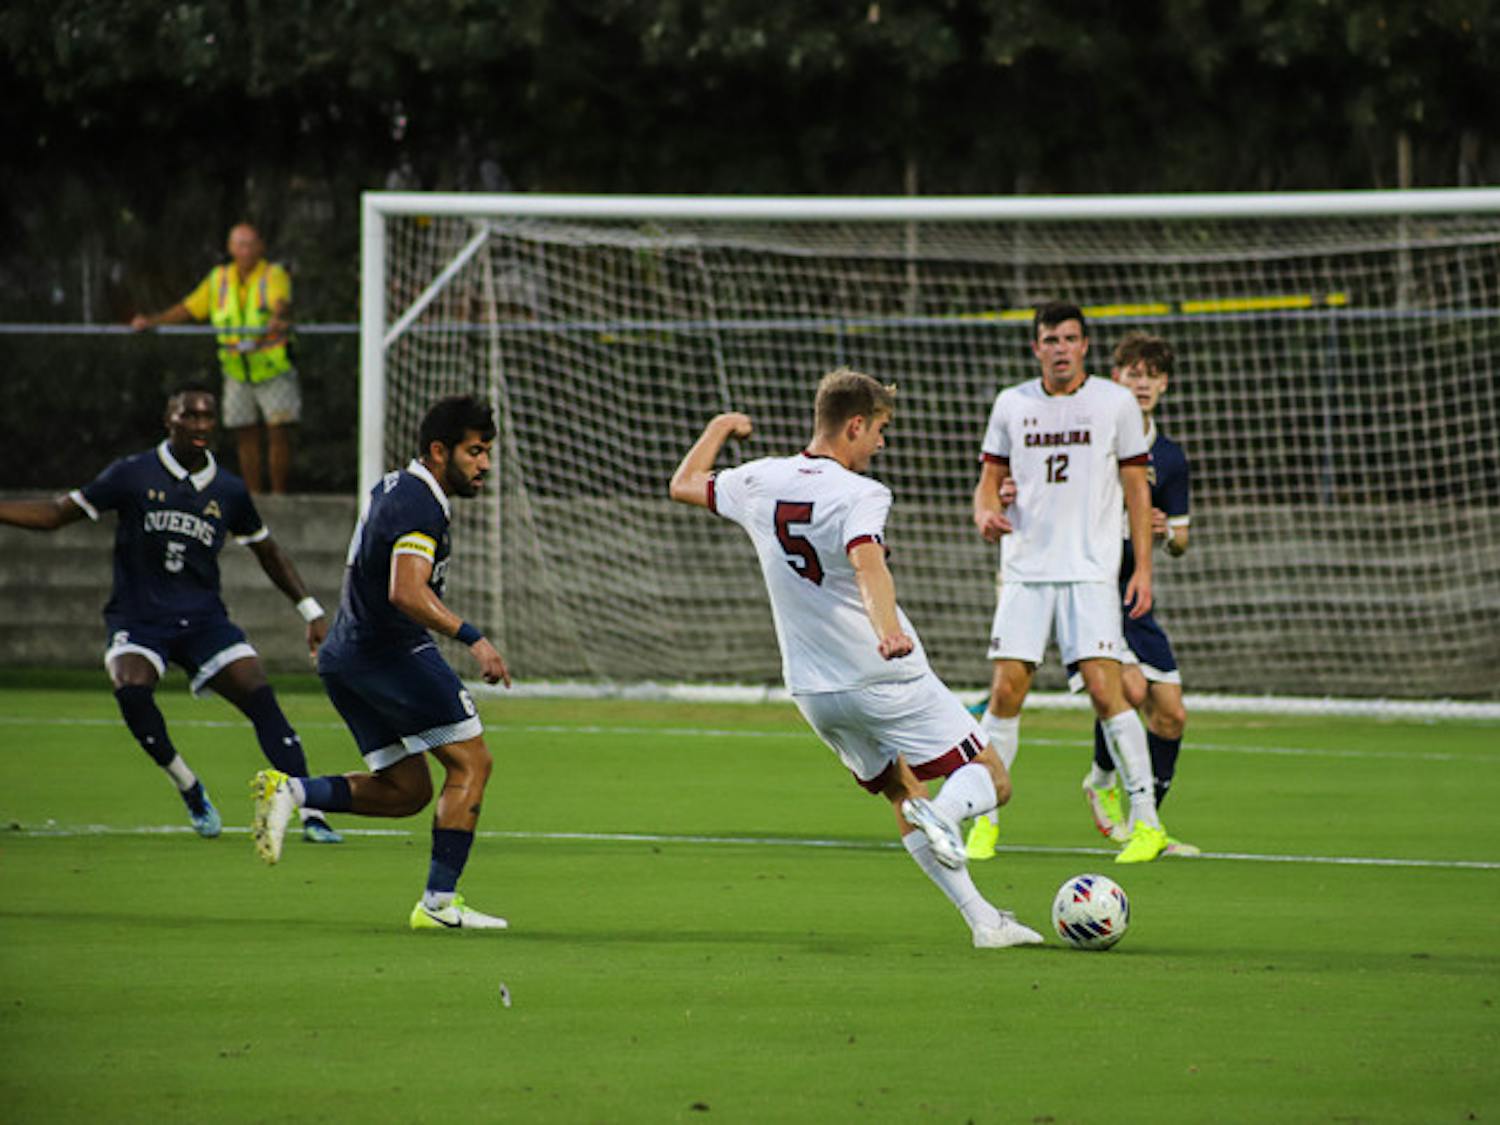 The South Carolina men's soccer team beat the Queen's University 3-1 on Sept. 20, 2022. Junior forward Adam Luckhurst led the way for South Carolina, scoring his second and third goals of the season, which make him the team leader in goals this year.